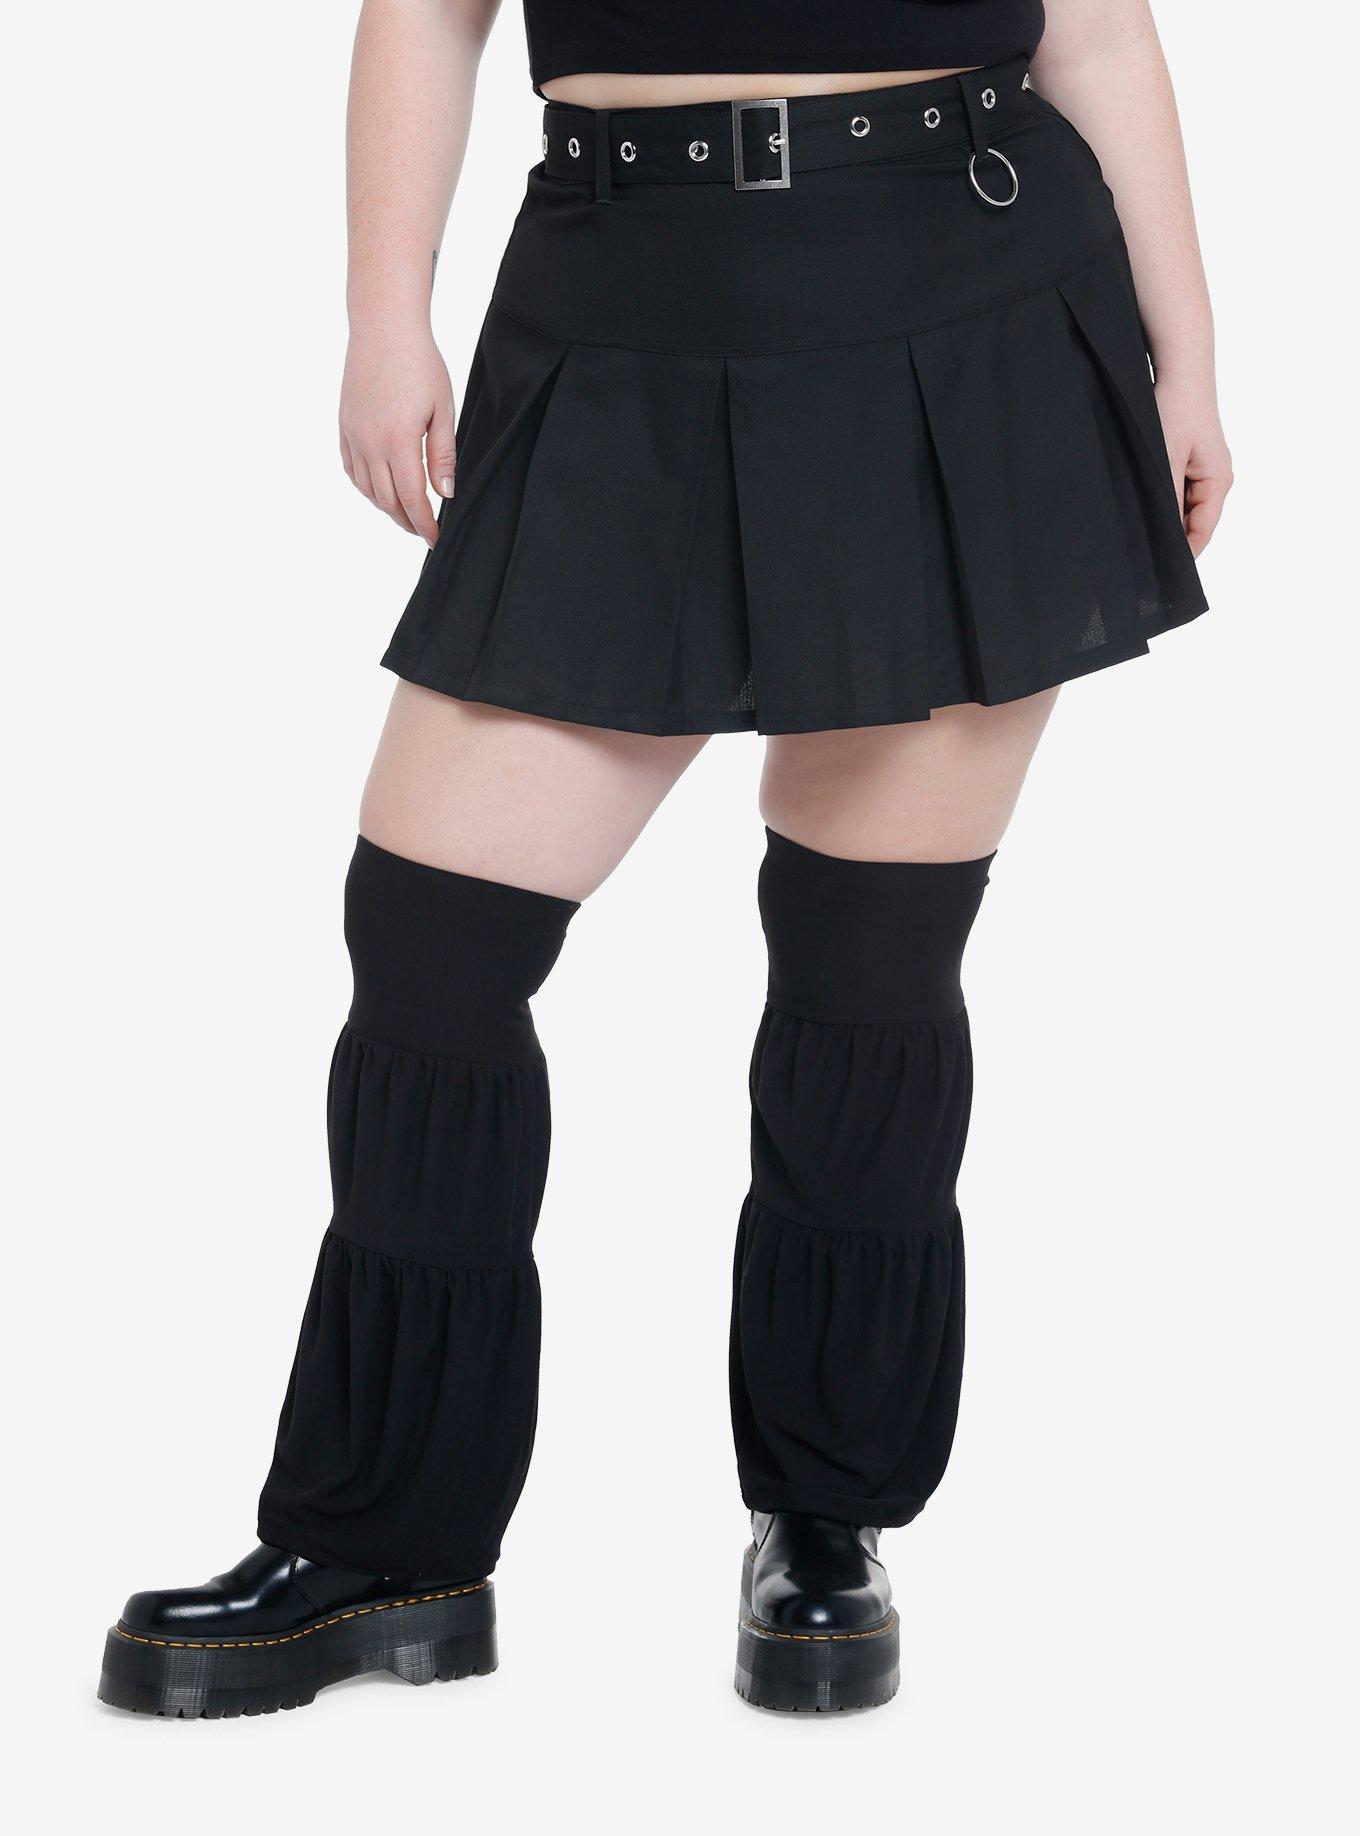 udslæt Fryse Tante Black Pleated Mini Skirt With Leg Warmers Plus Size | Hot Topic